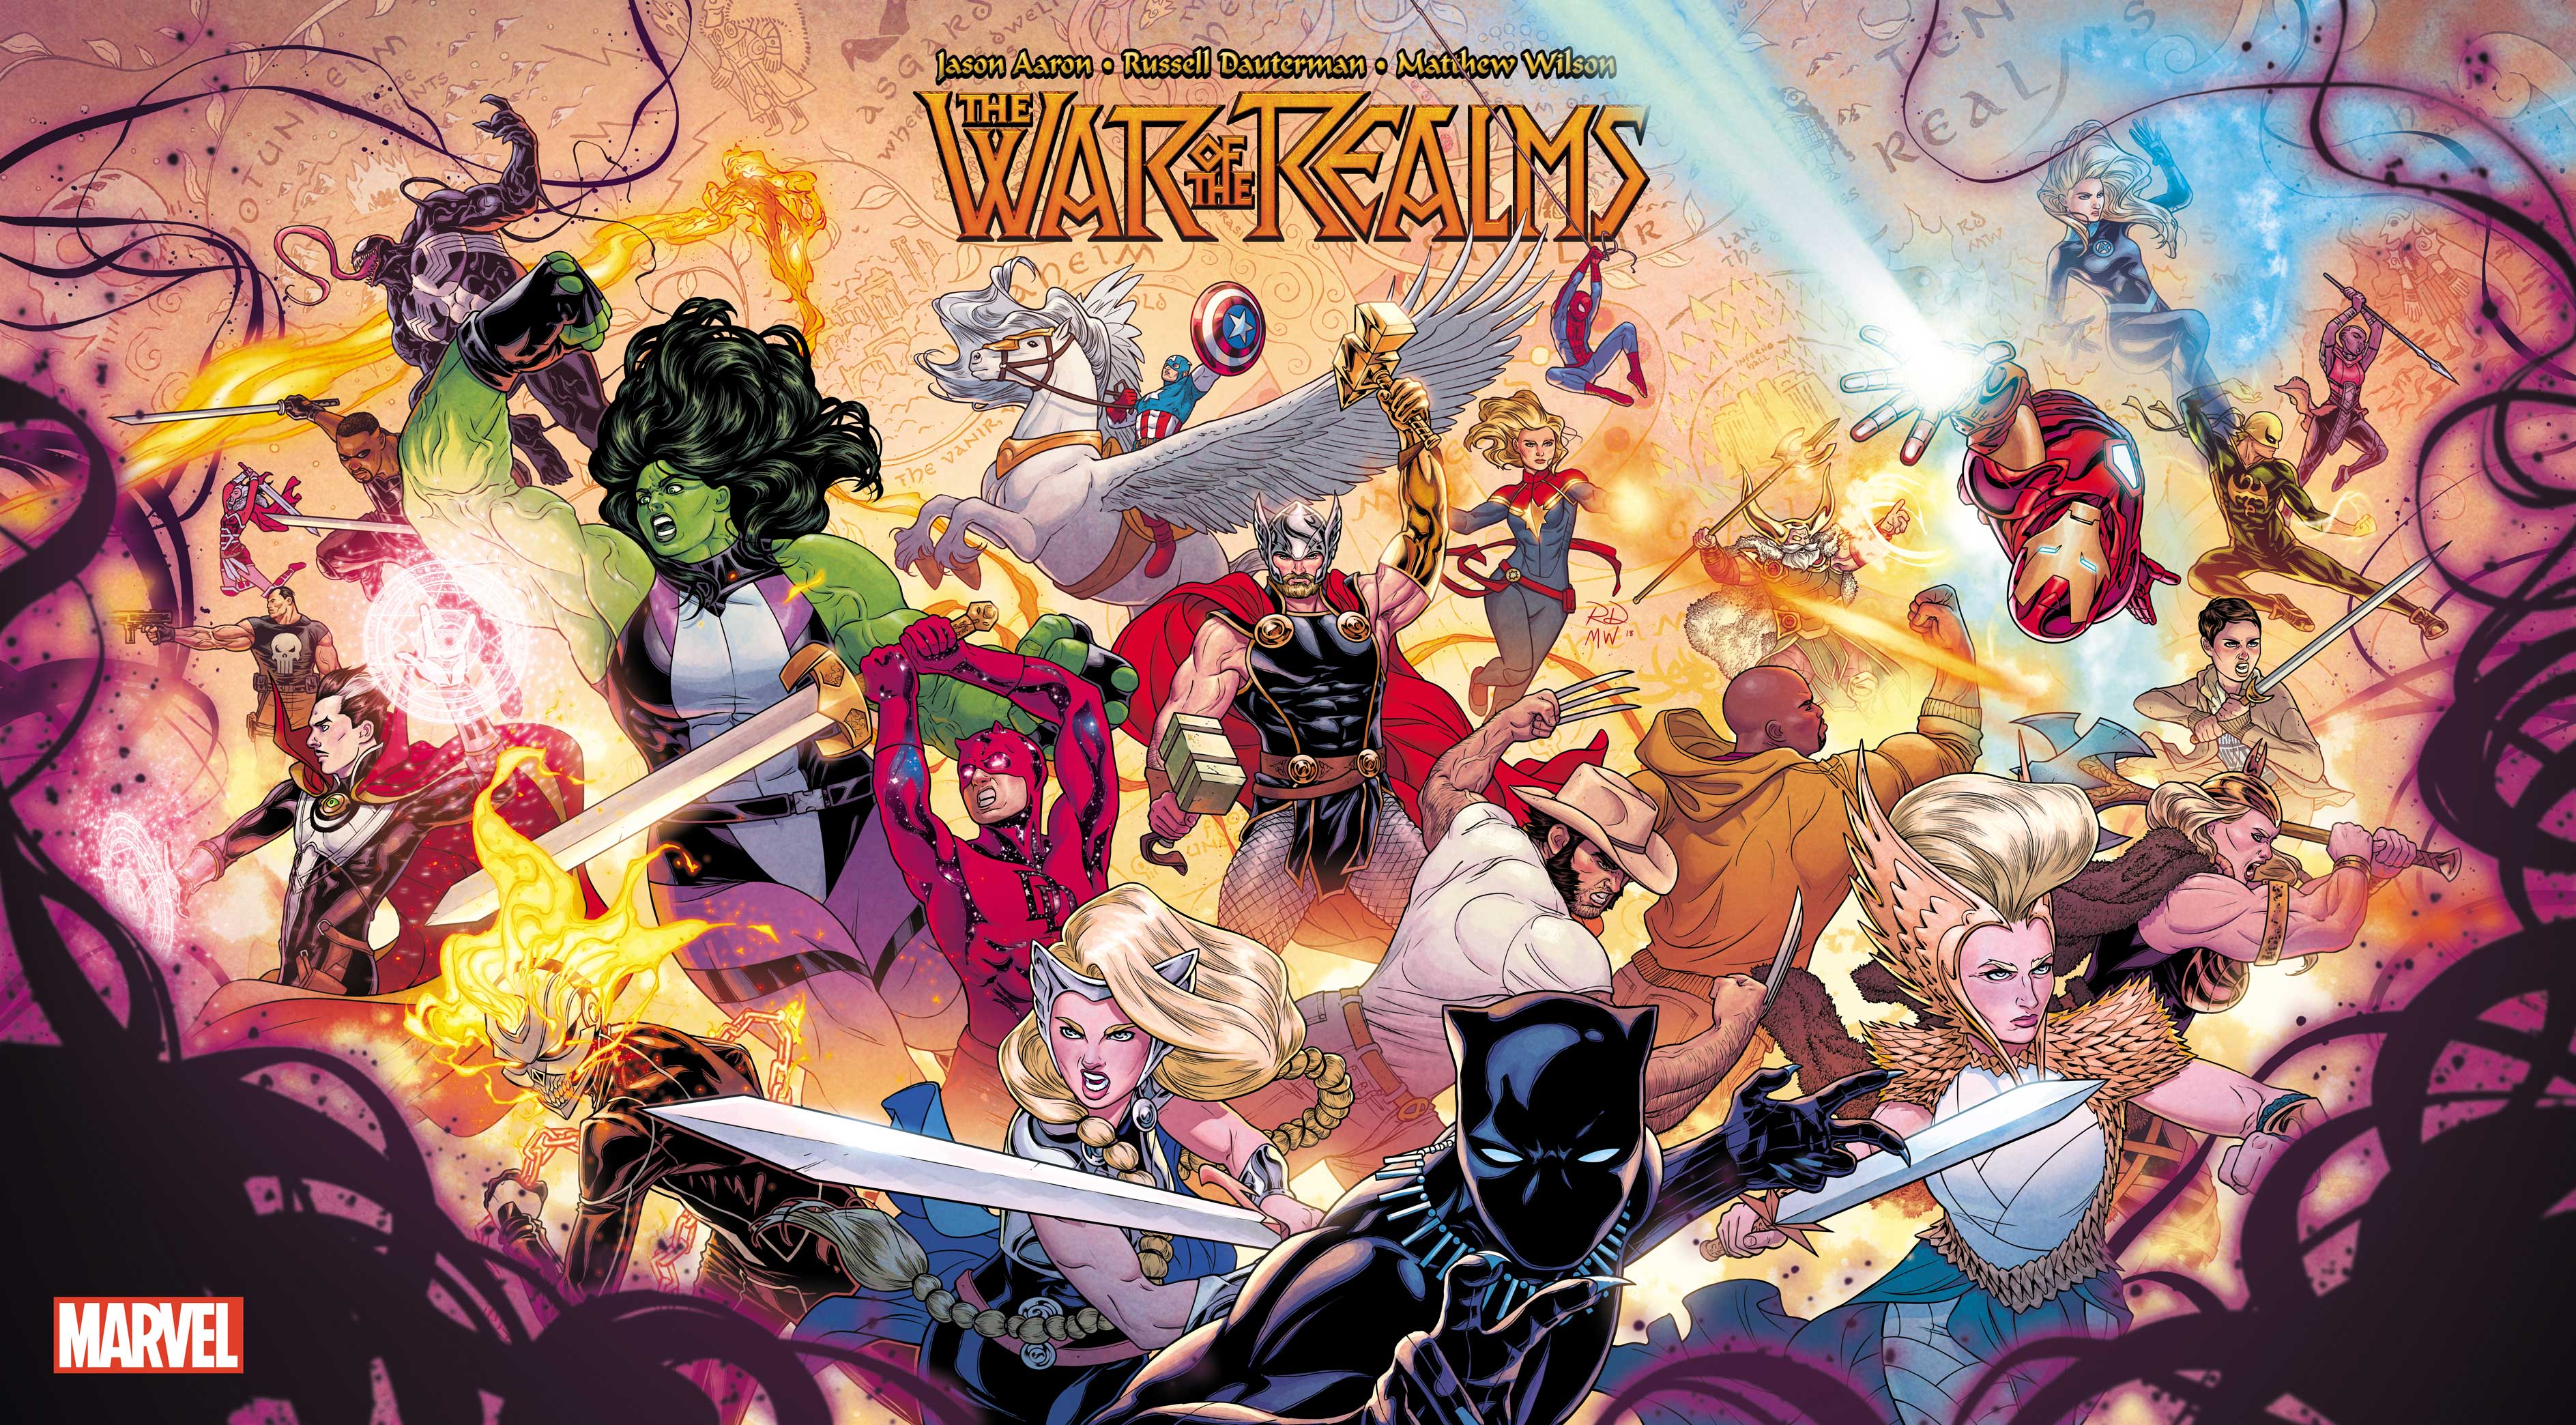 WAR OF THE REALMS IS COMING…